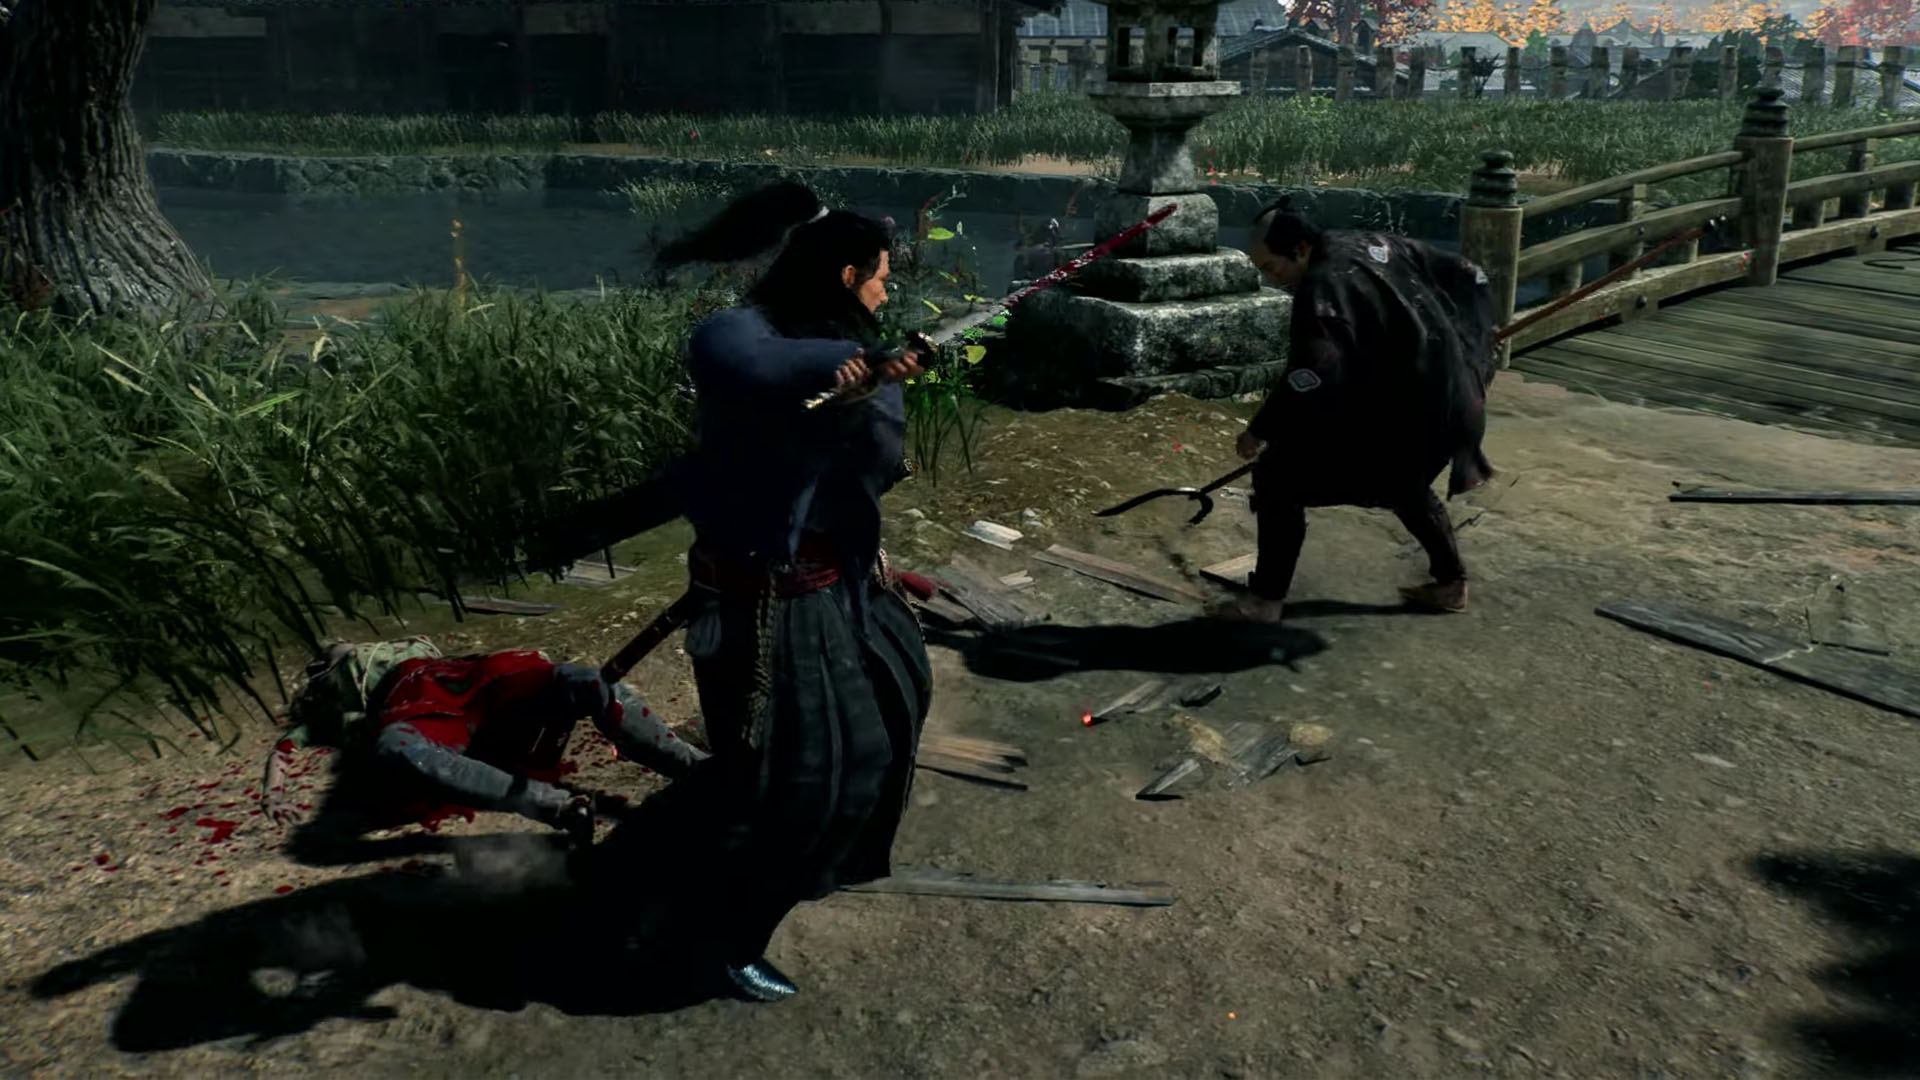 Battle across 19th century Japan in Rise of the Ronin, coming March 22, ps5